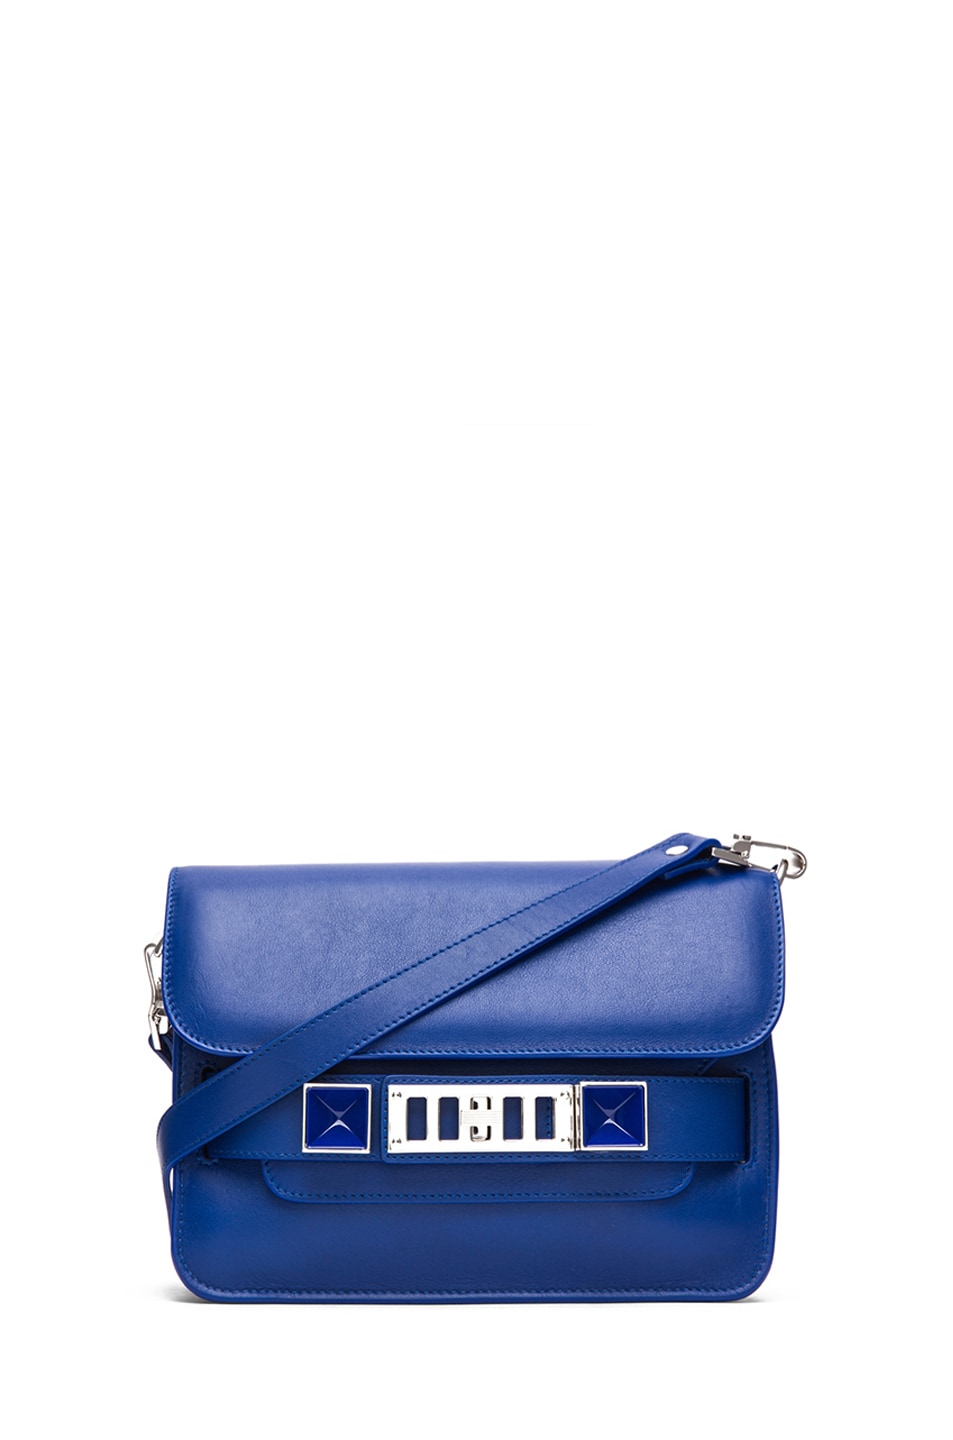 Image 1 of Proenza Schouler Mini PS11 Classic Smooth Leather Shoulder Bag in Royal Blue